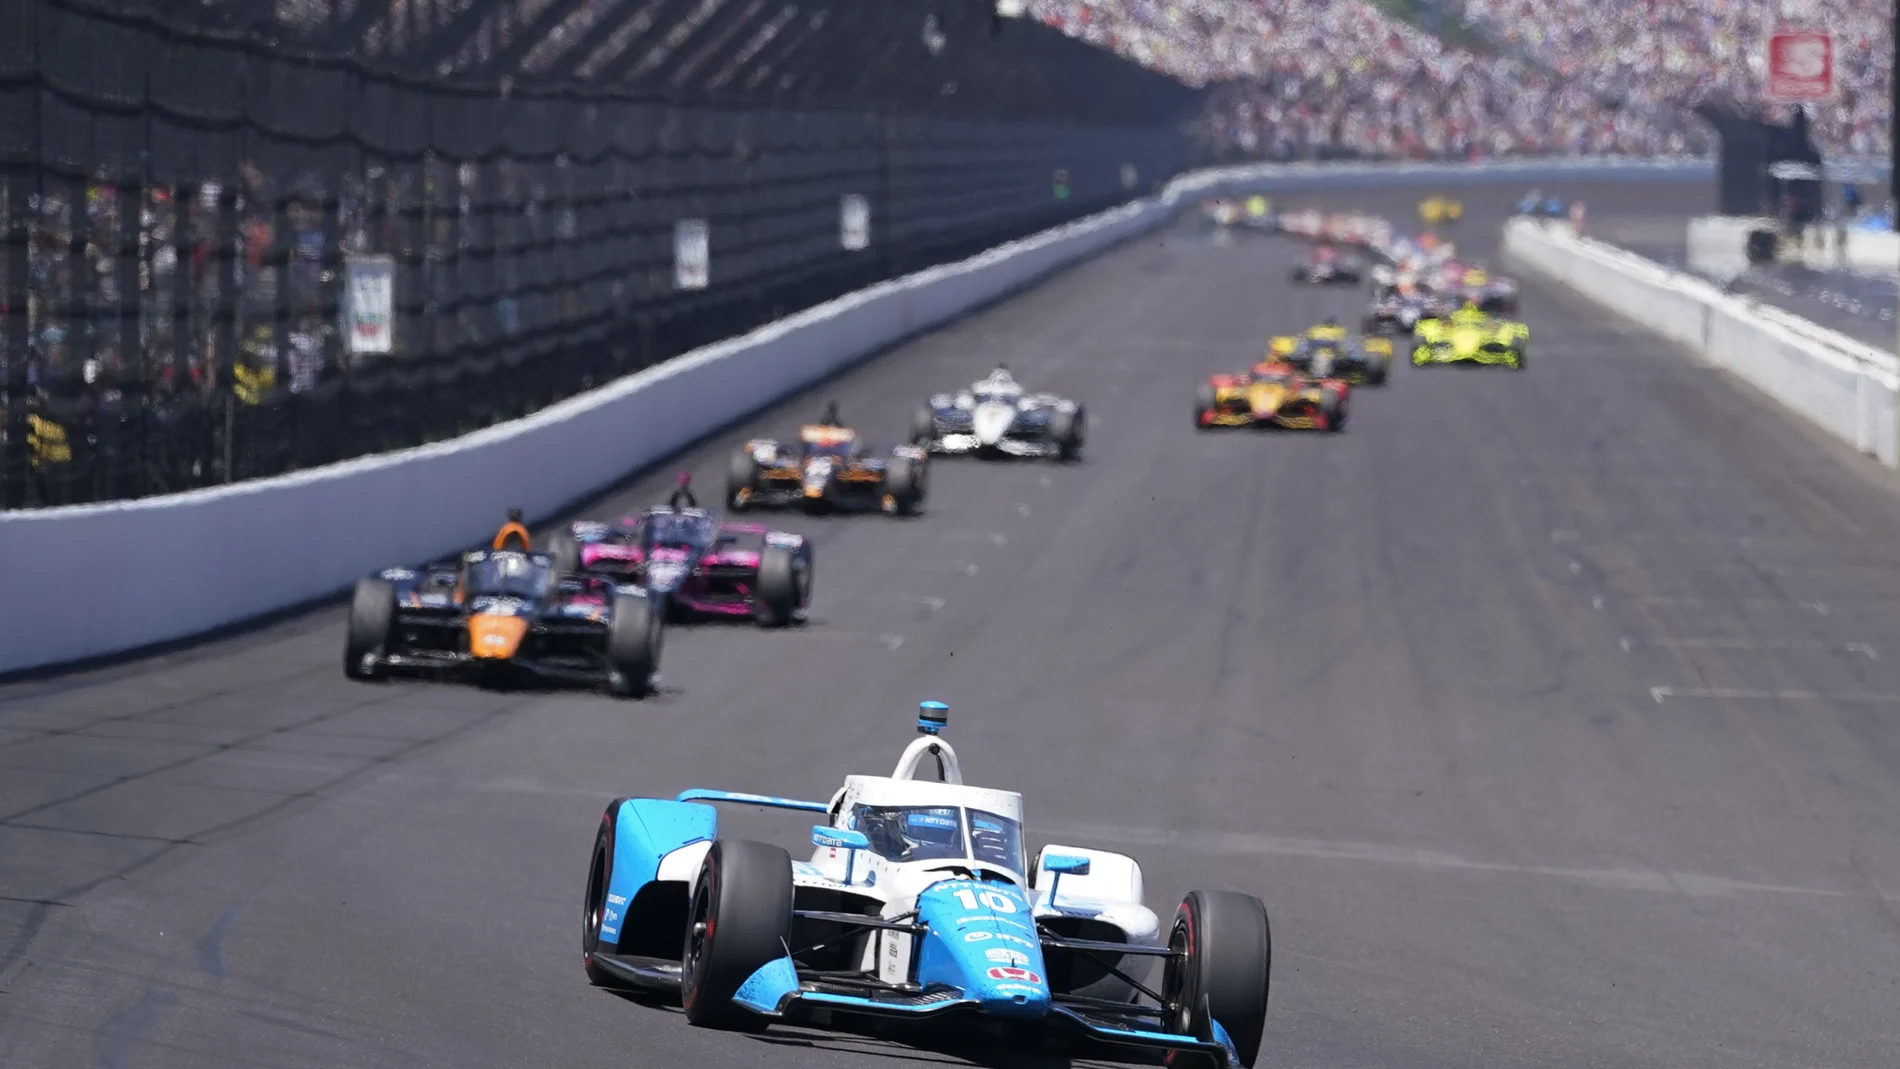 Alex Palou, of Spain, drives into Turn 1 during the Indianapolis 500 auto race at Indianapolis Motor Speedway, Sunday, May 30, 2021, in Indianapolis. (AP Photo/Darron Cummings)